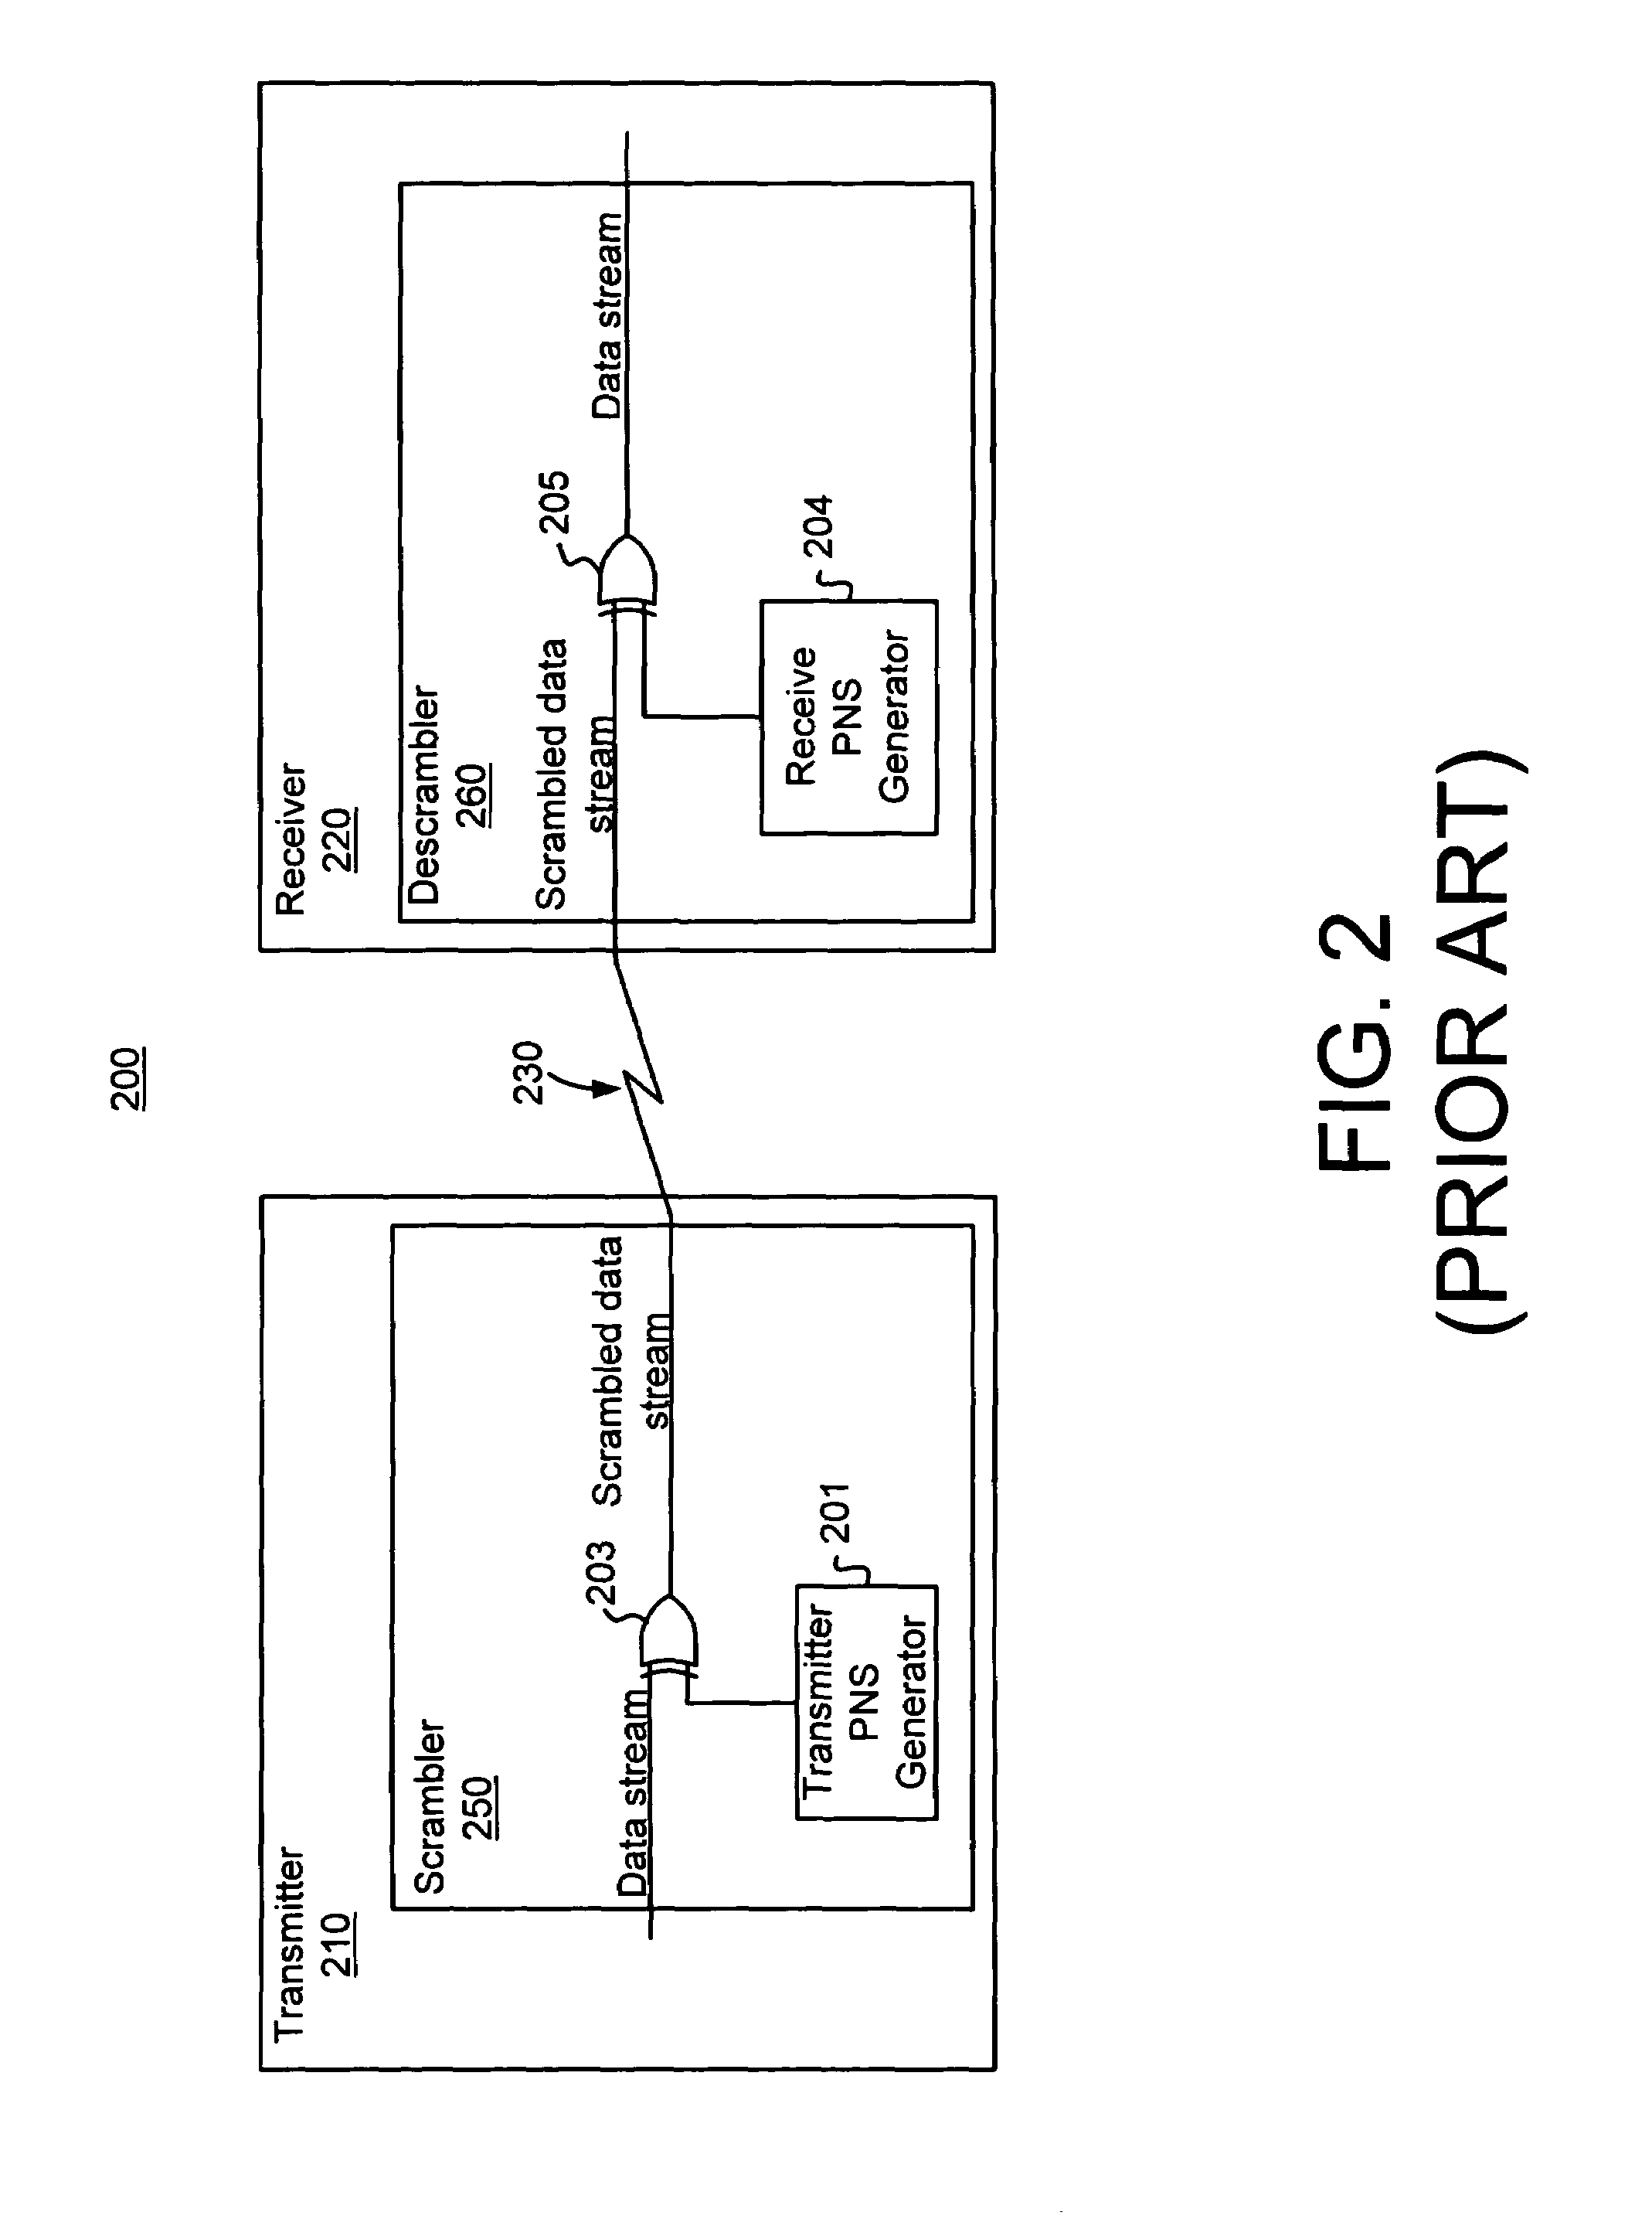 Communication device and method for using non-self-synchronizing scrambling in a communication system